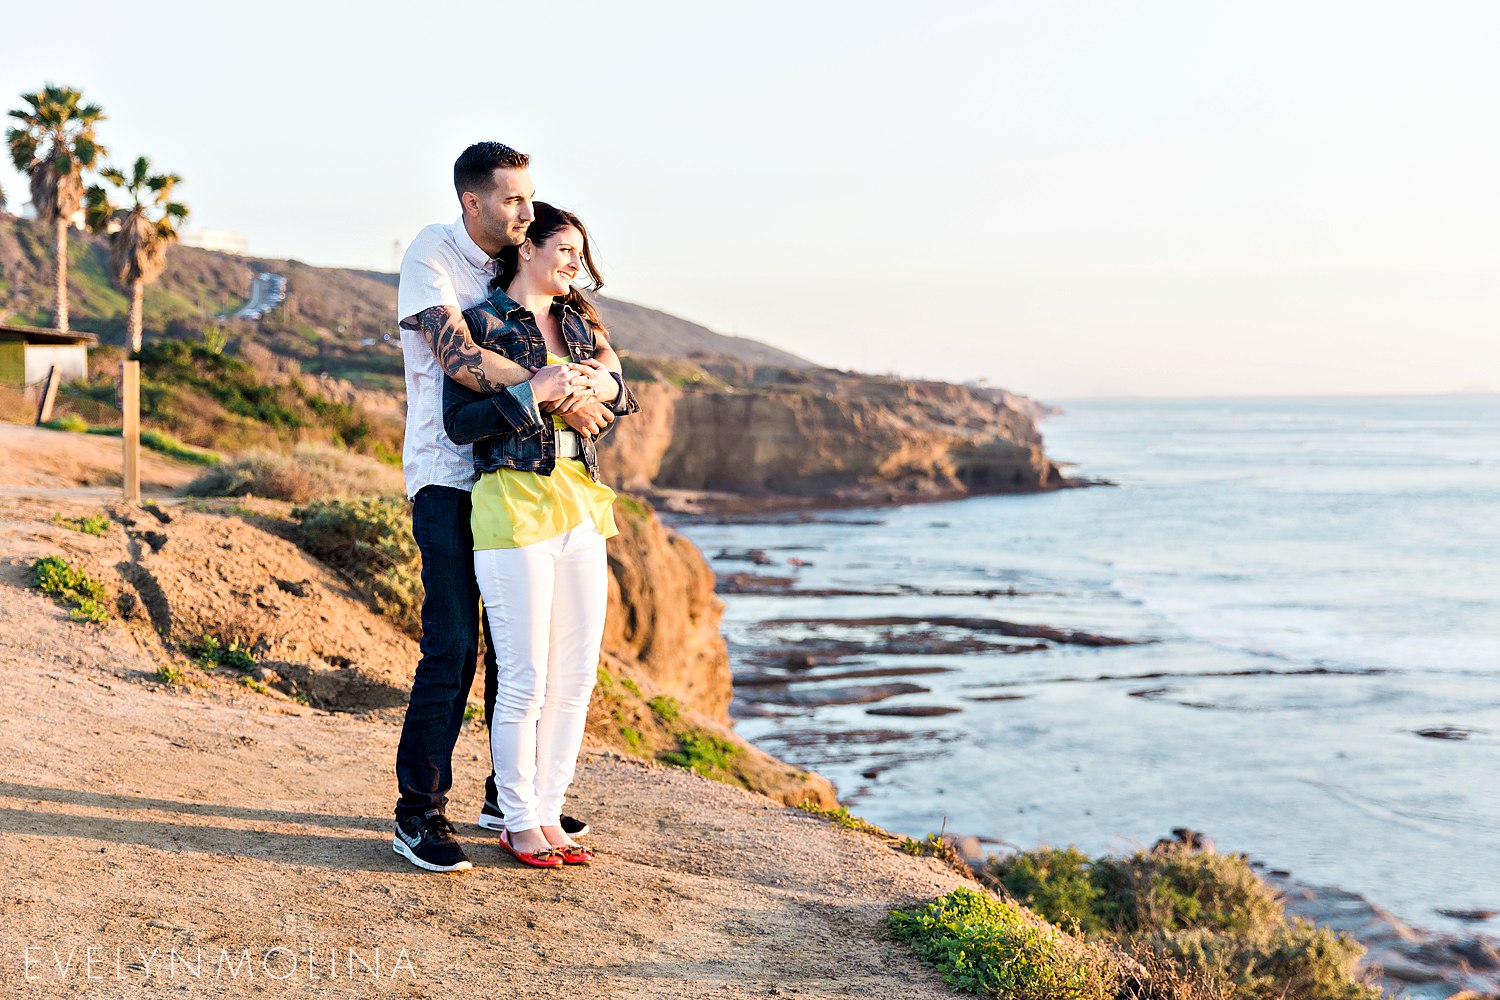 Sunset Cliffs Engagement Session - Carly and Alex - Evelyn Molina Photography_0014.jpg